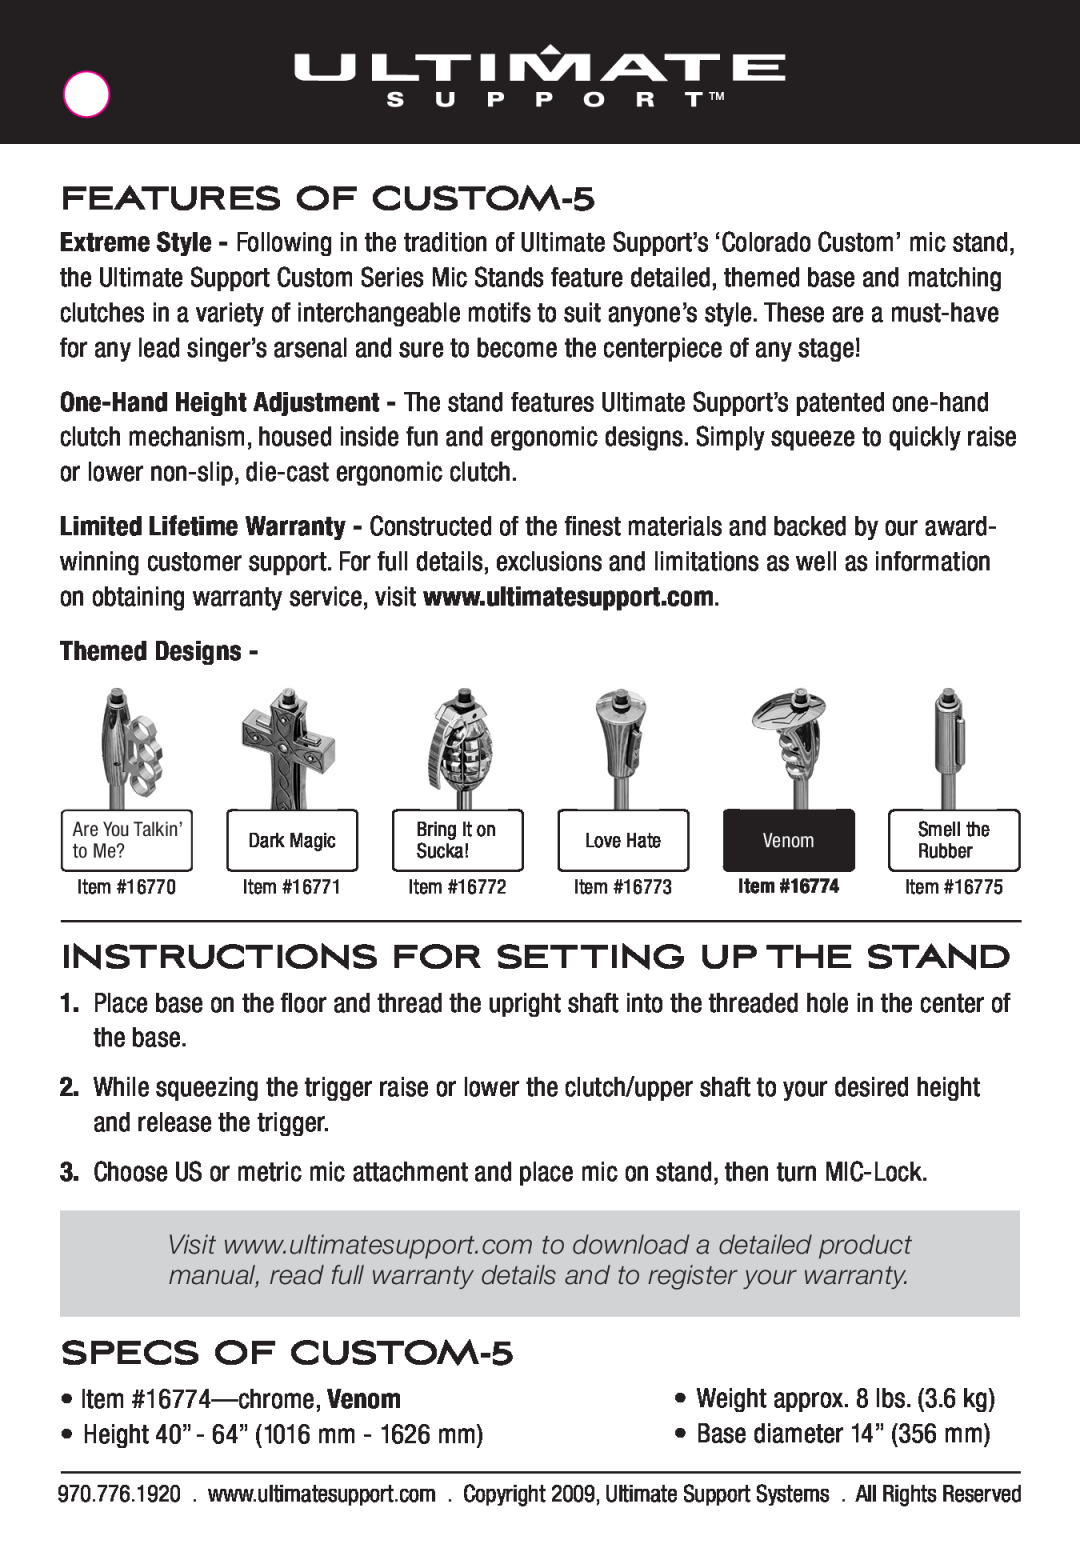 Ultimate Support Systems 16774T manual FEATURES OF CUSTOM-5, Instructions For Setting Up The Stand, SPECS OF CUSTOM-5 